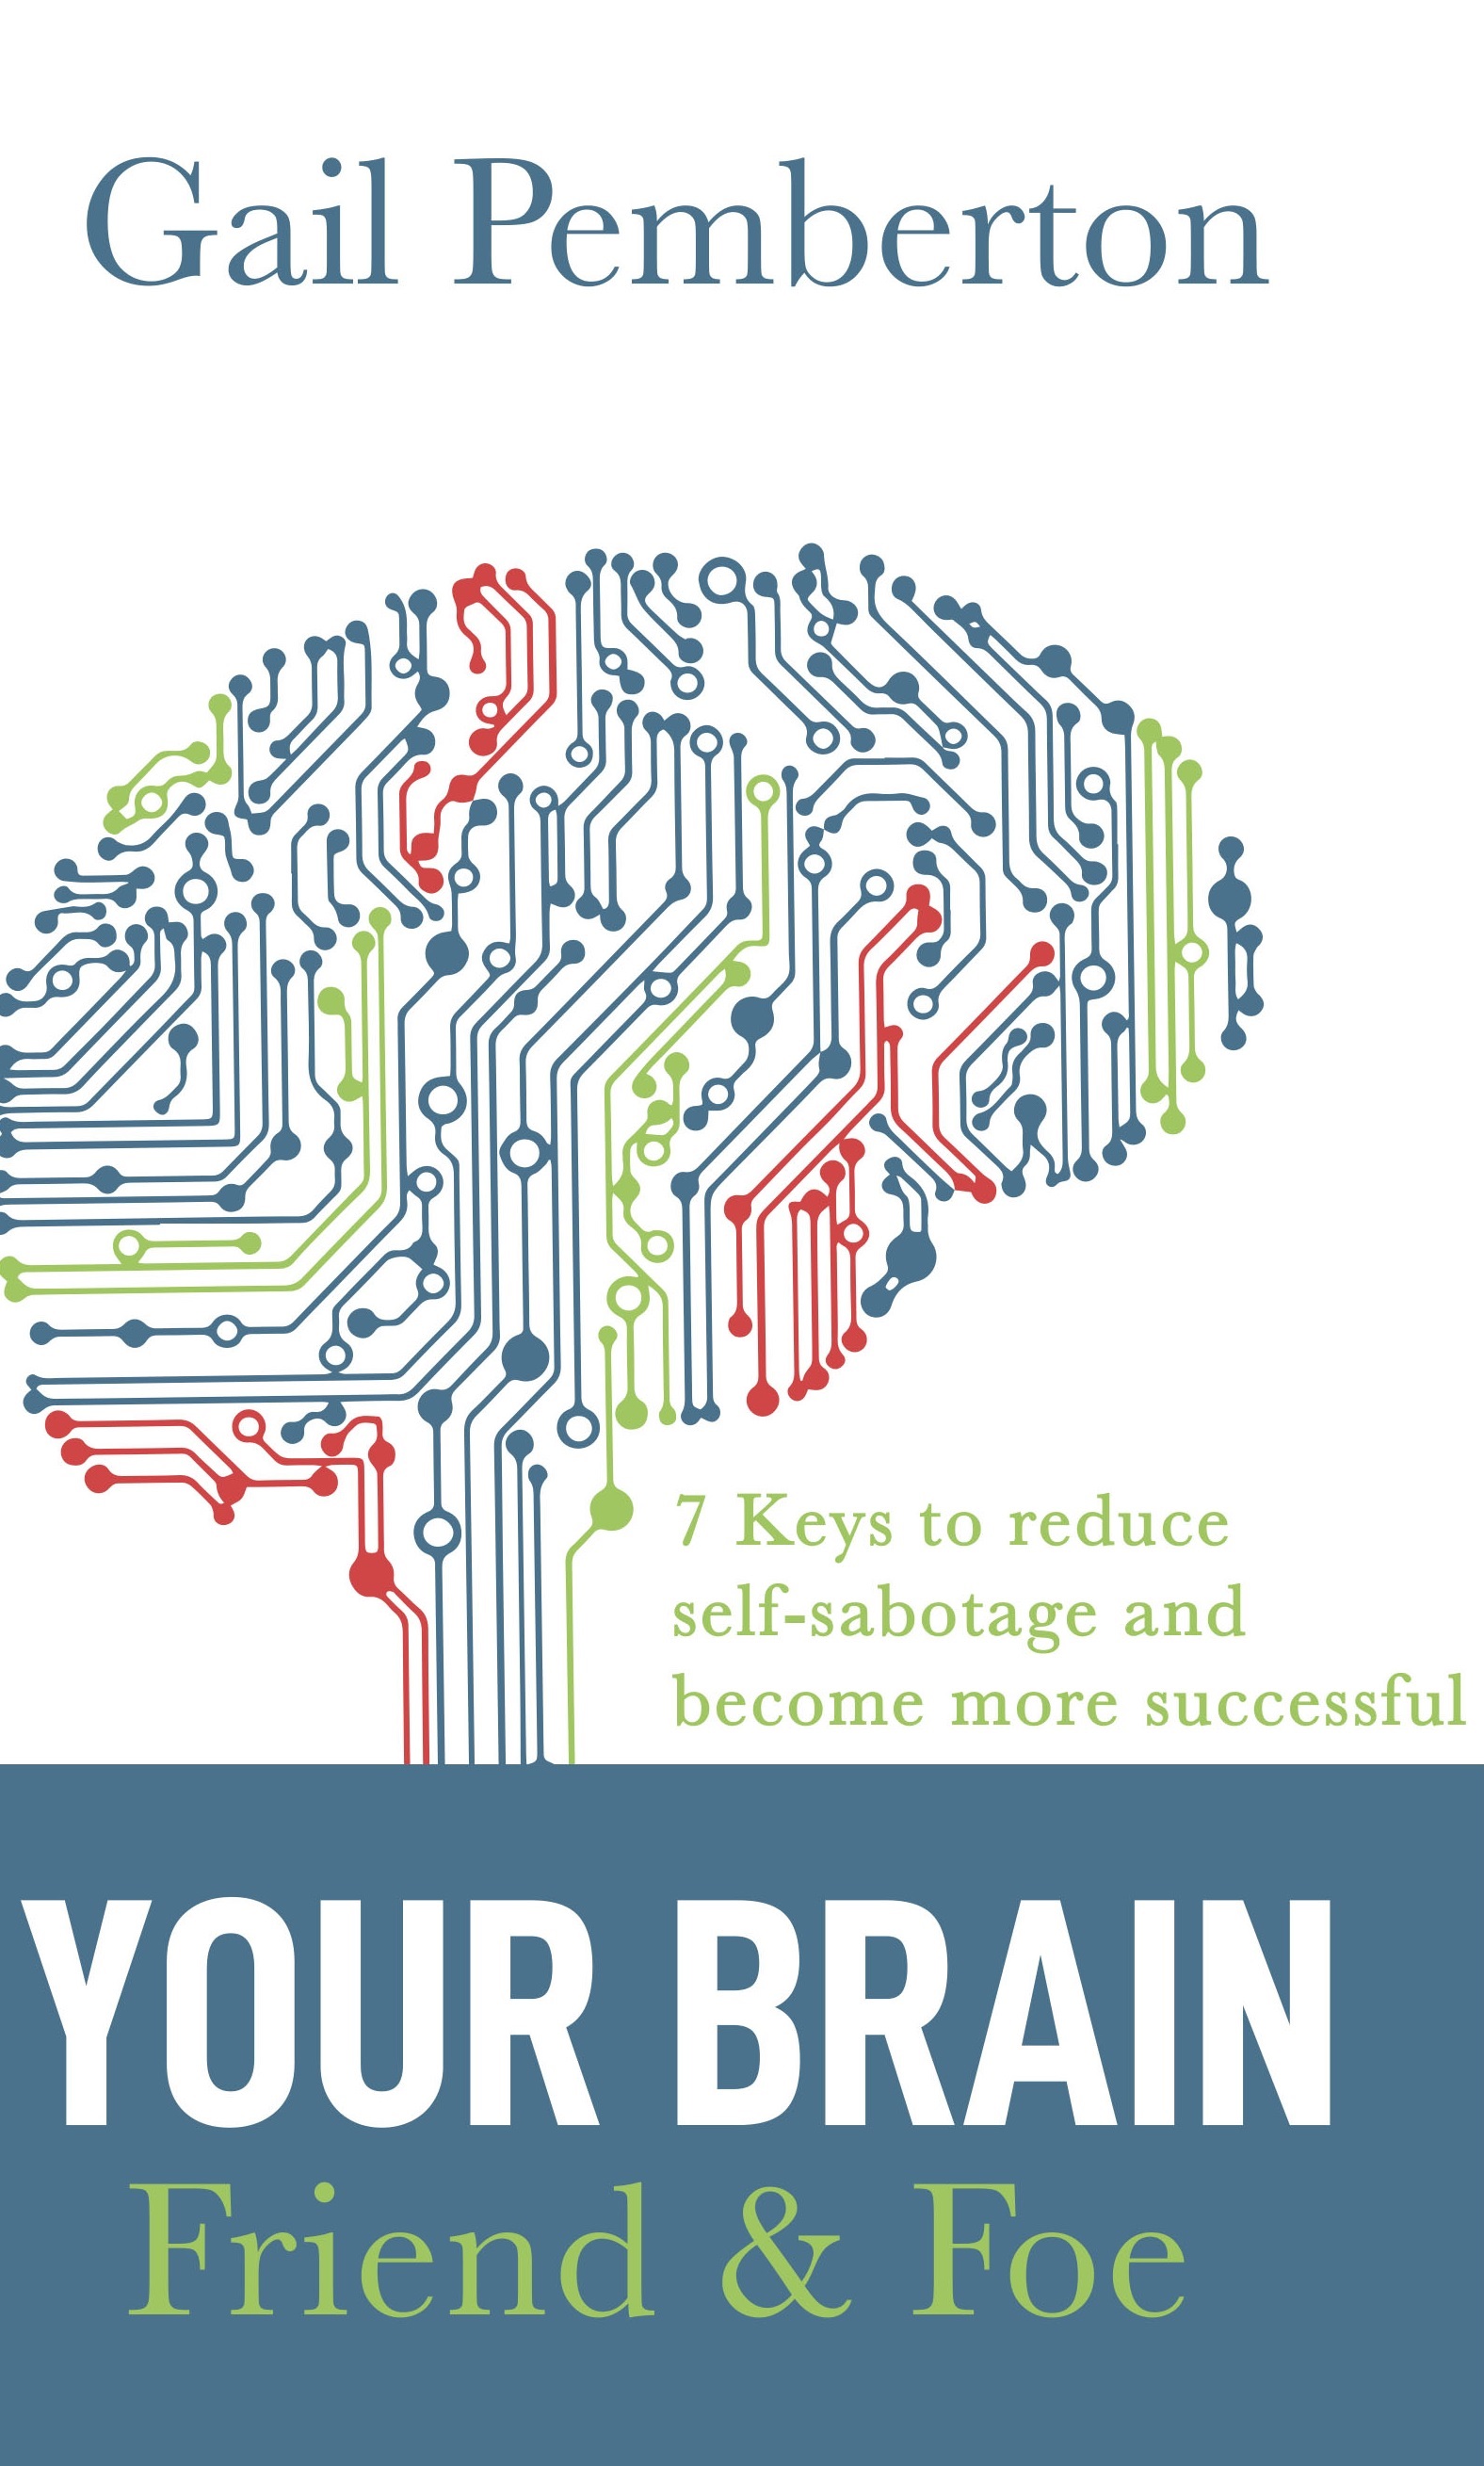 Your Brain - Friend & Foe: 7 Keys to reduce self-sabotage and become more successful